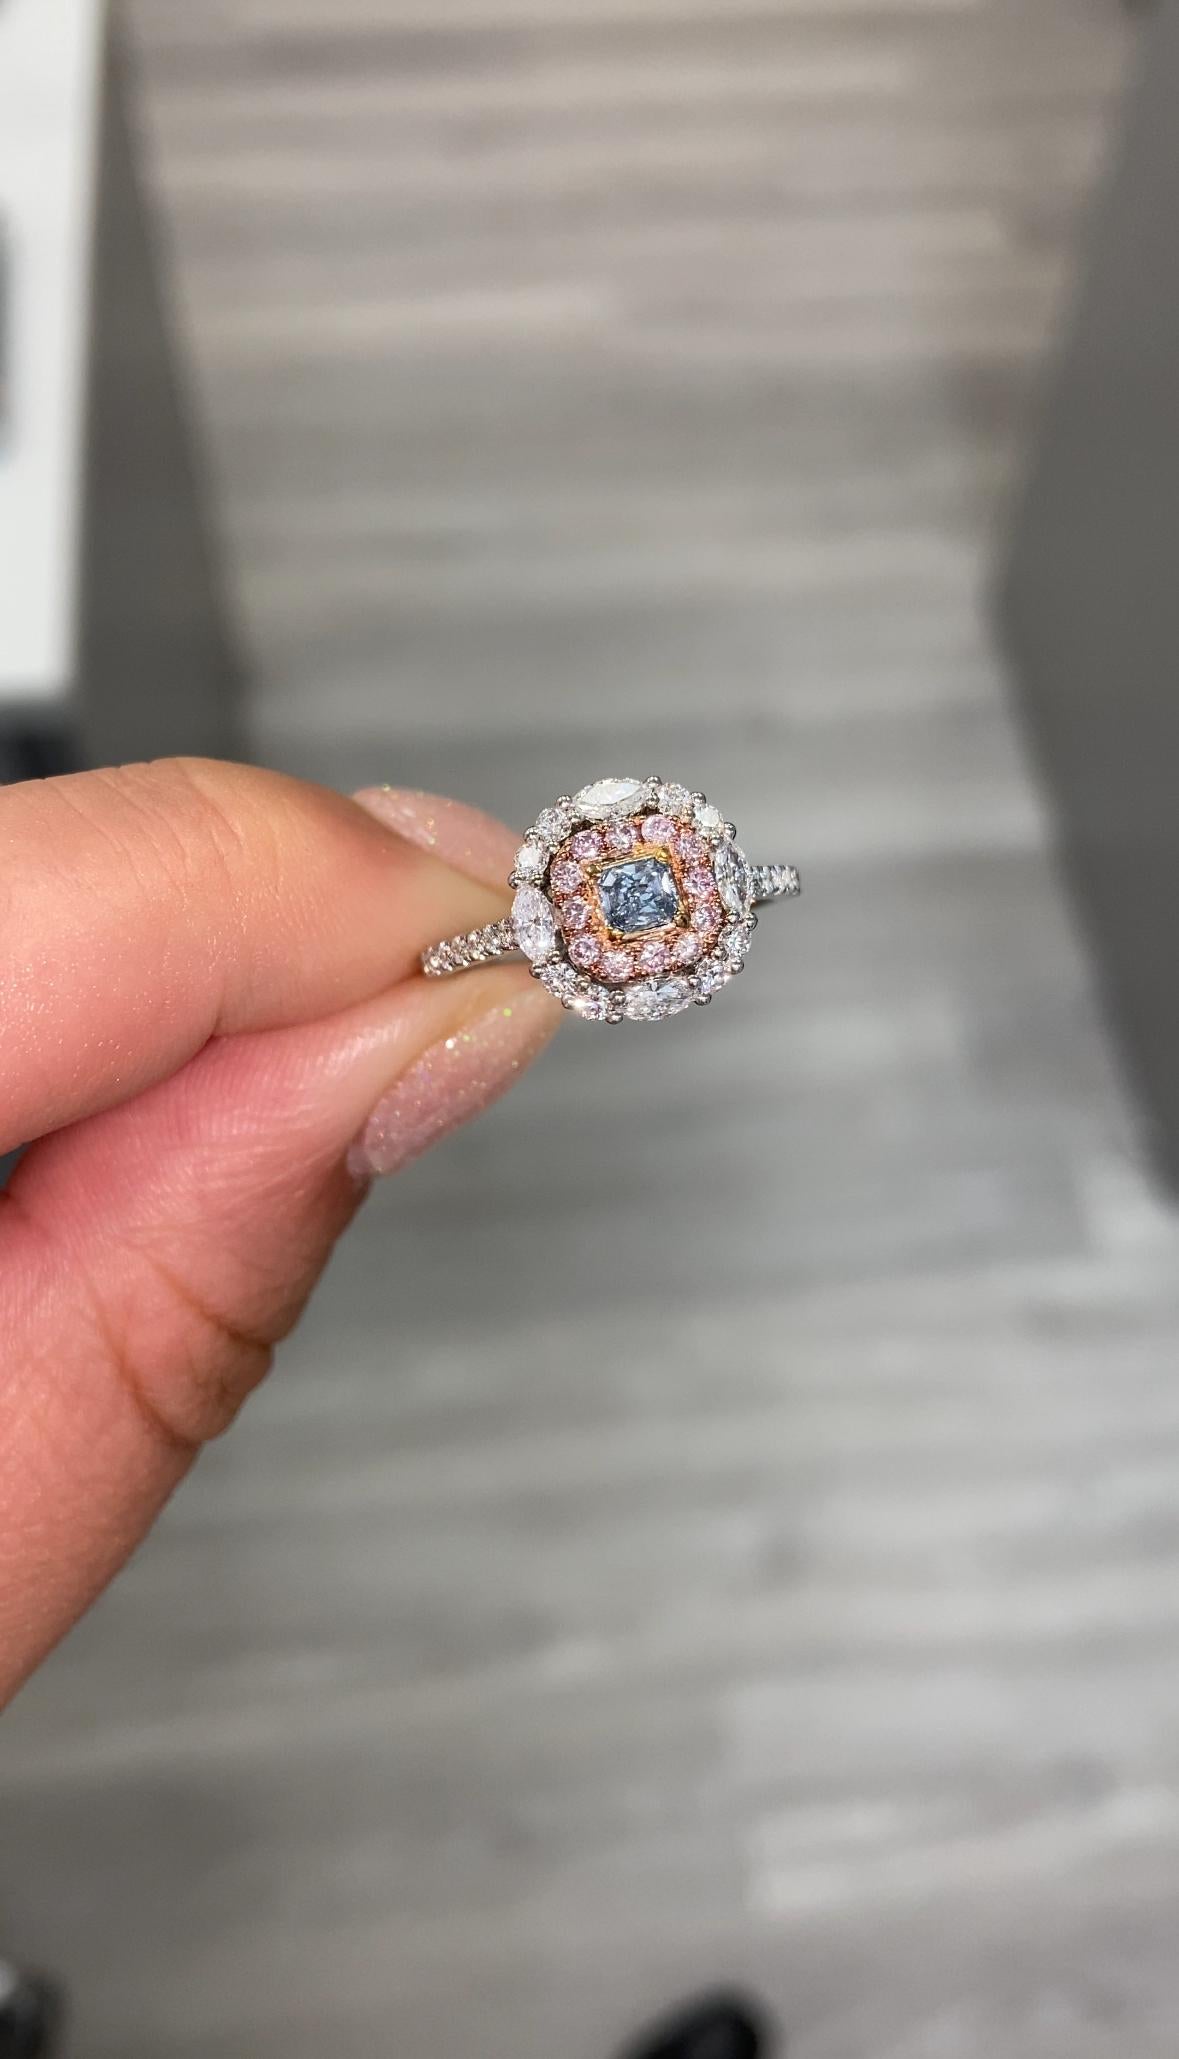 0.17 Carat Center Diamond 
Fancy Blue
Radiant Cut 
VS2 Clarity 
0.76 Carats of Surrounding Pink and White Marquises and Rounds 
GIA Certified Diamond
Crafted in Platinum
Handmade in NYC

This piece can be viewed before purchase in our showroom in